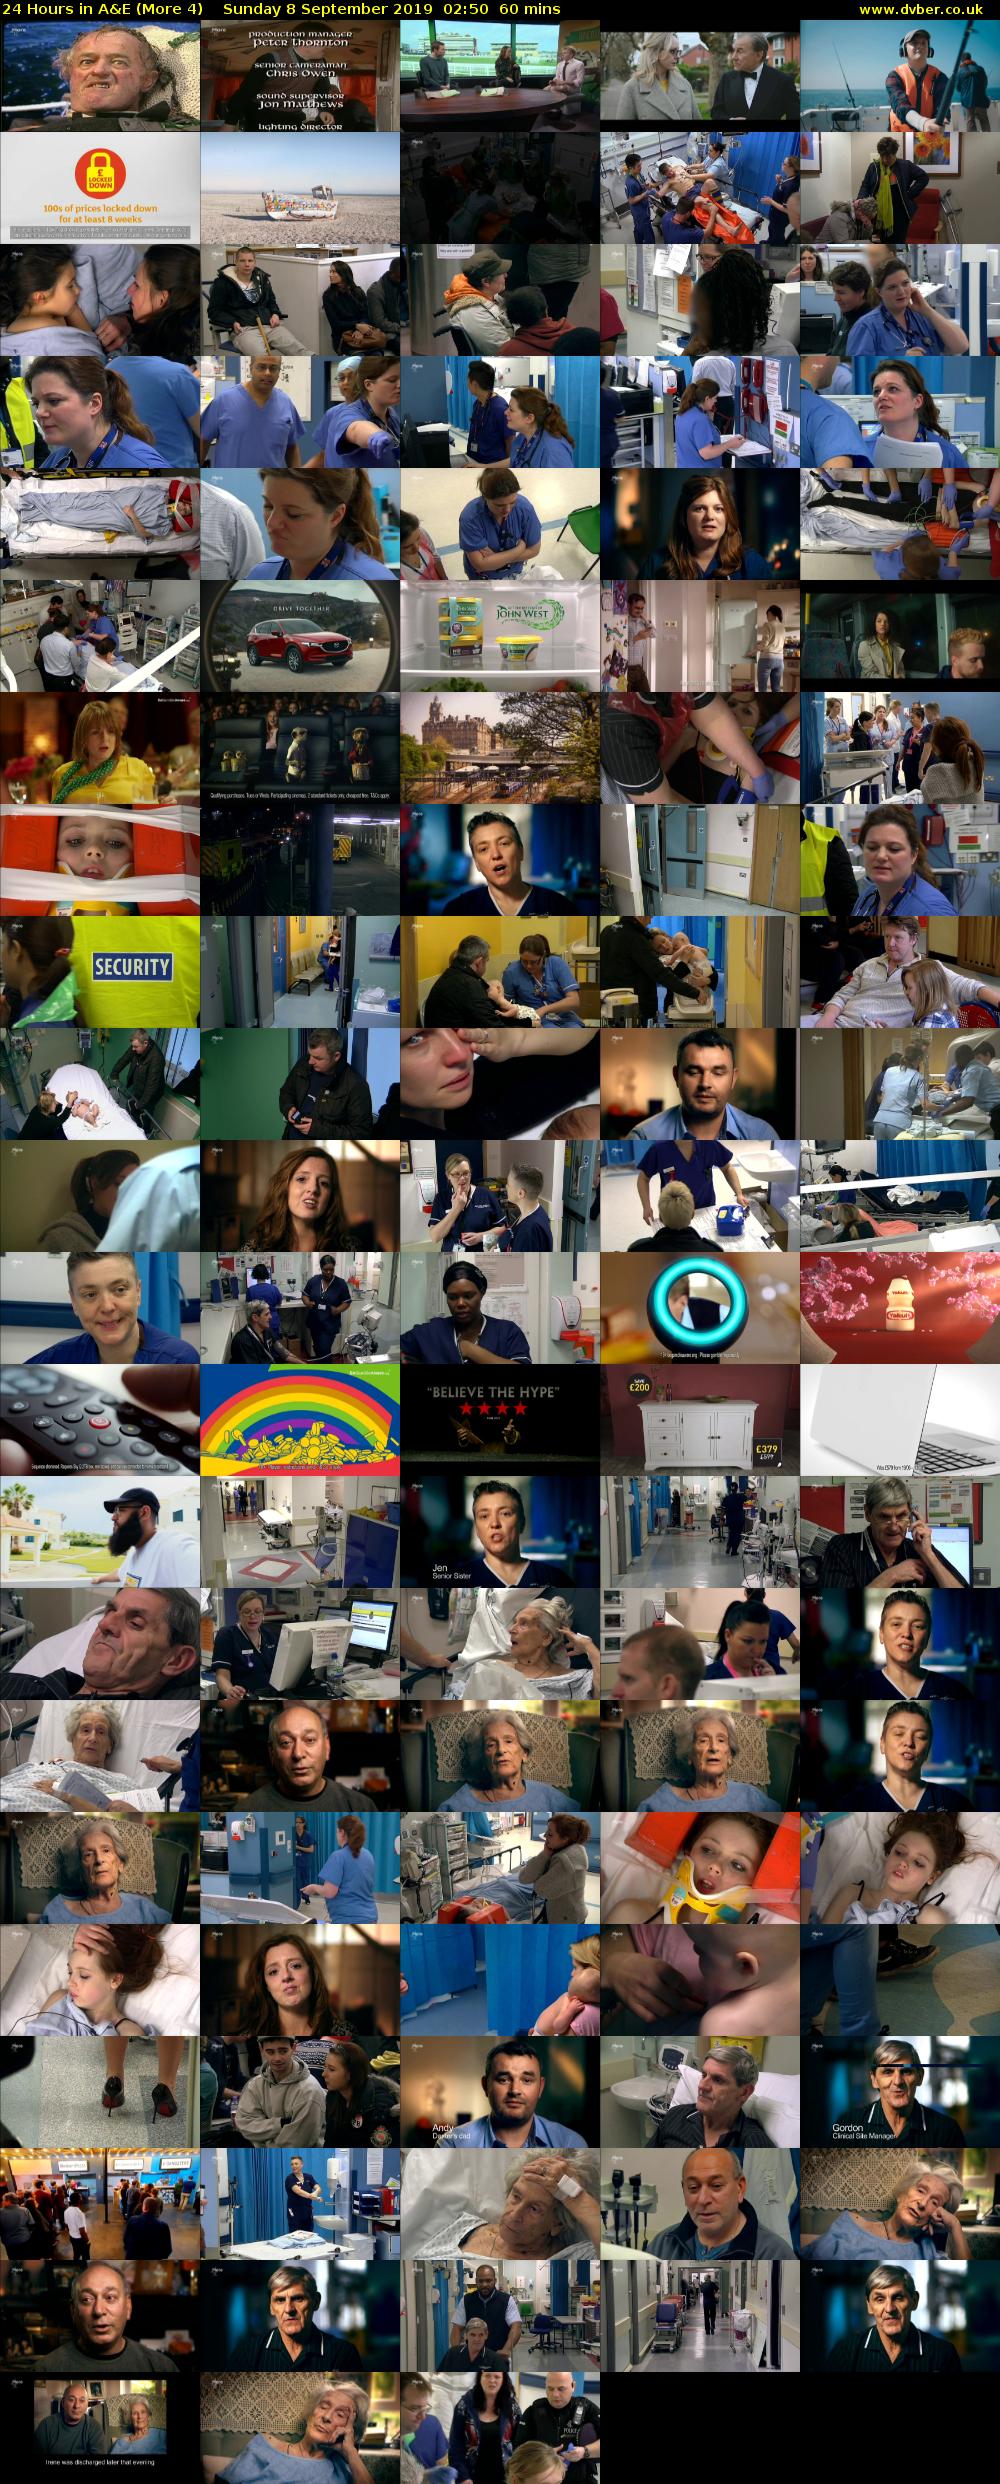 24 Hours in A&E (More 4) Sunday 8 September 2019 02:50 - 03:50